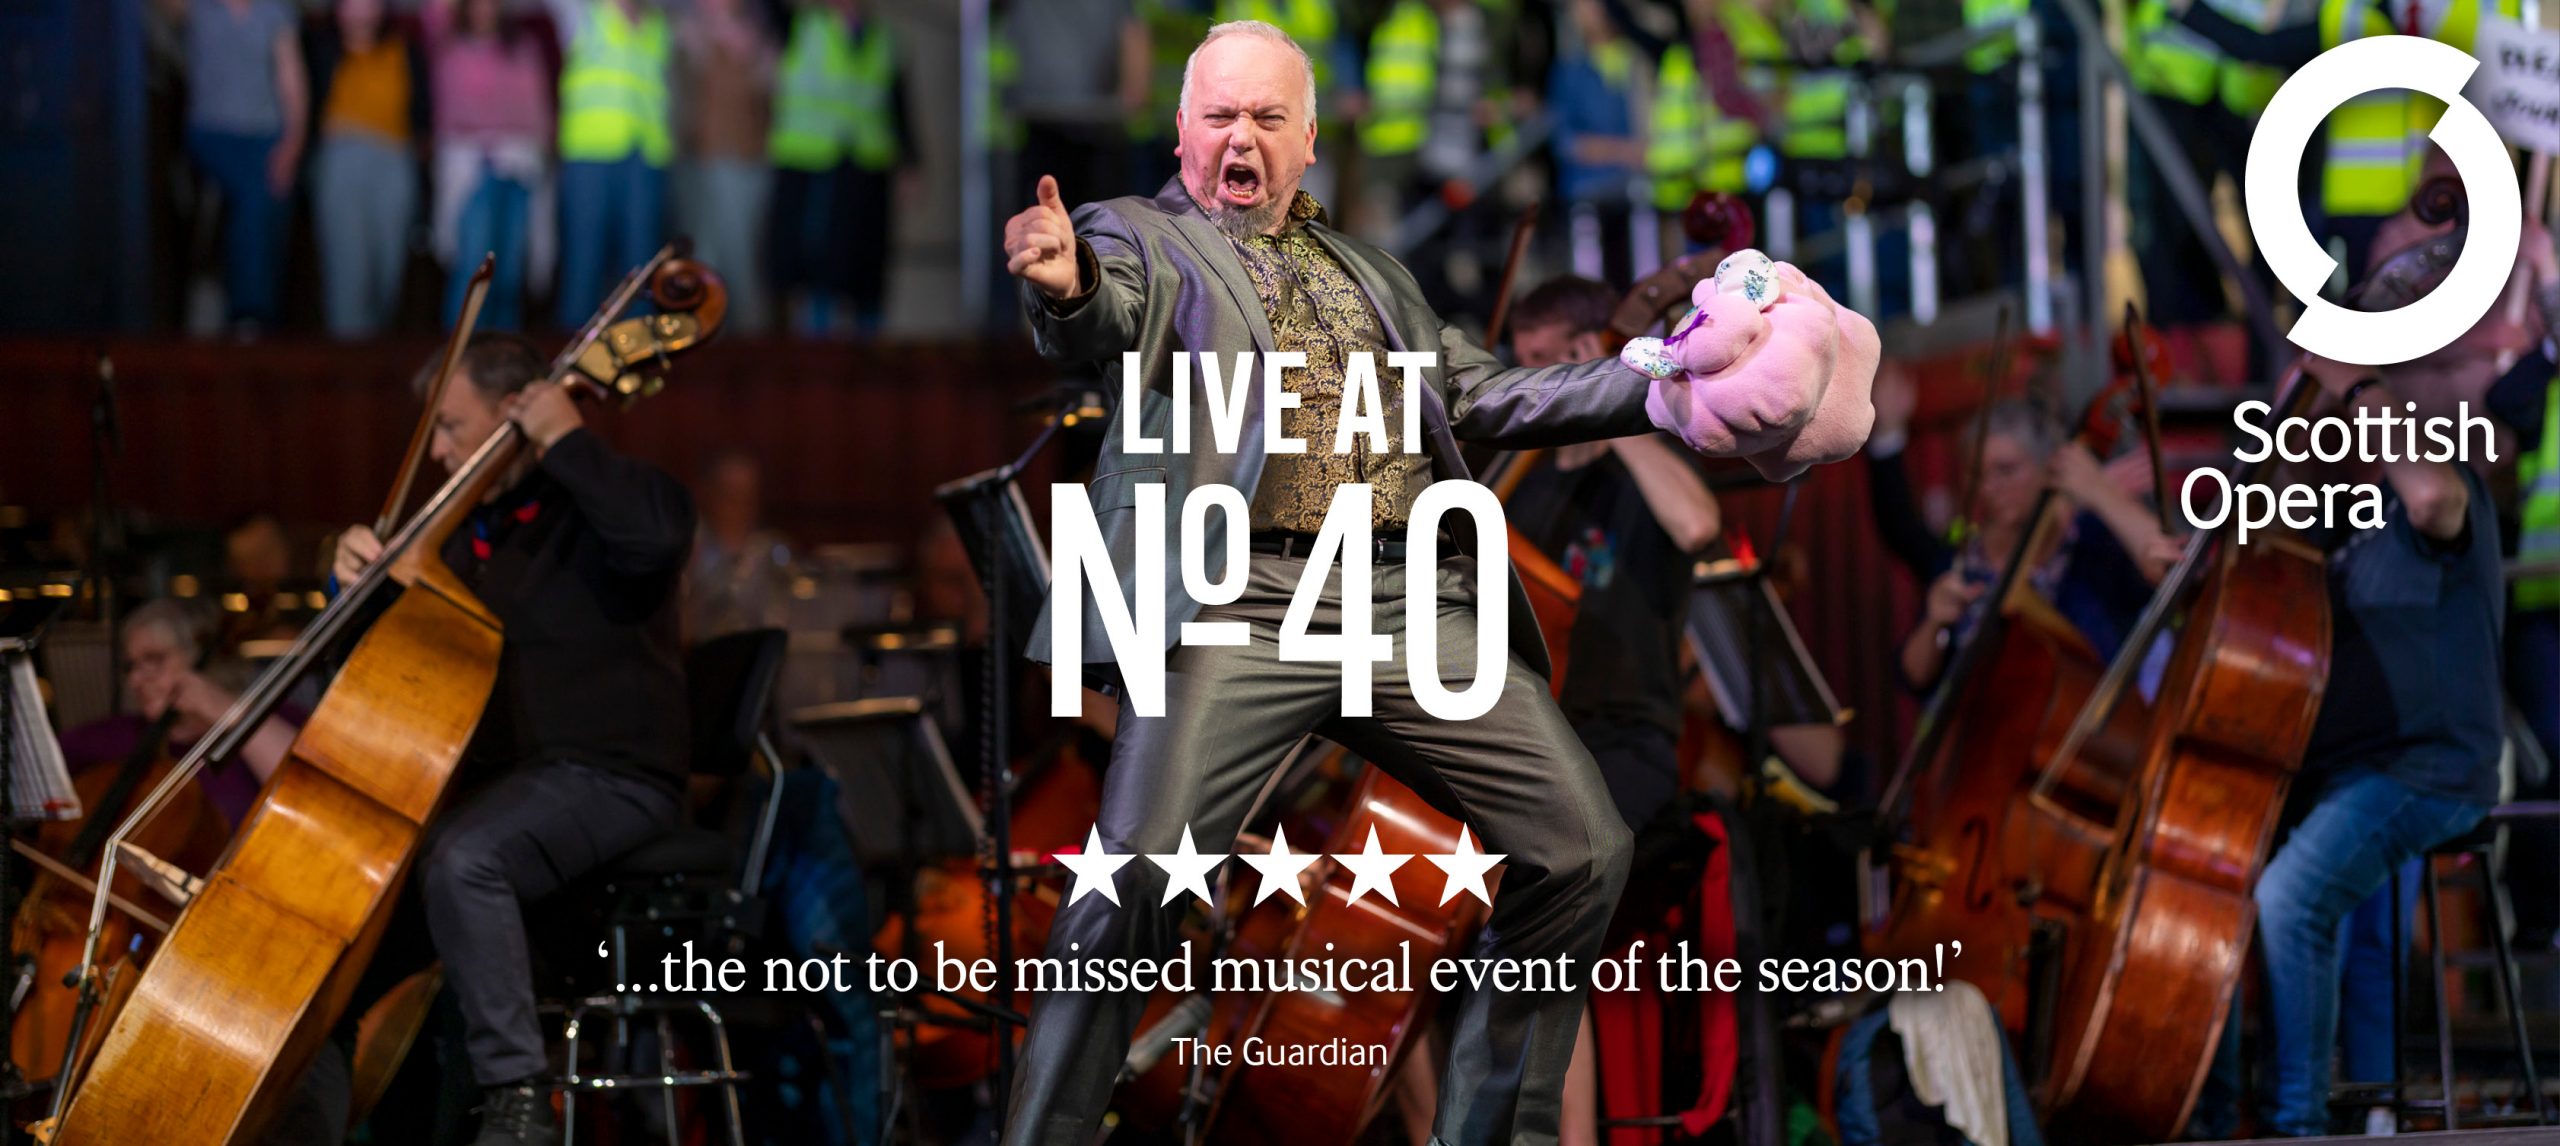 A man singing and dancing on the stage at the Live at No.40 event with a five star review from The Guardian.